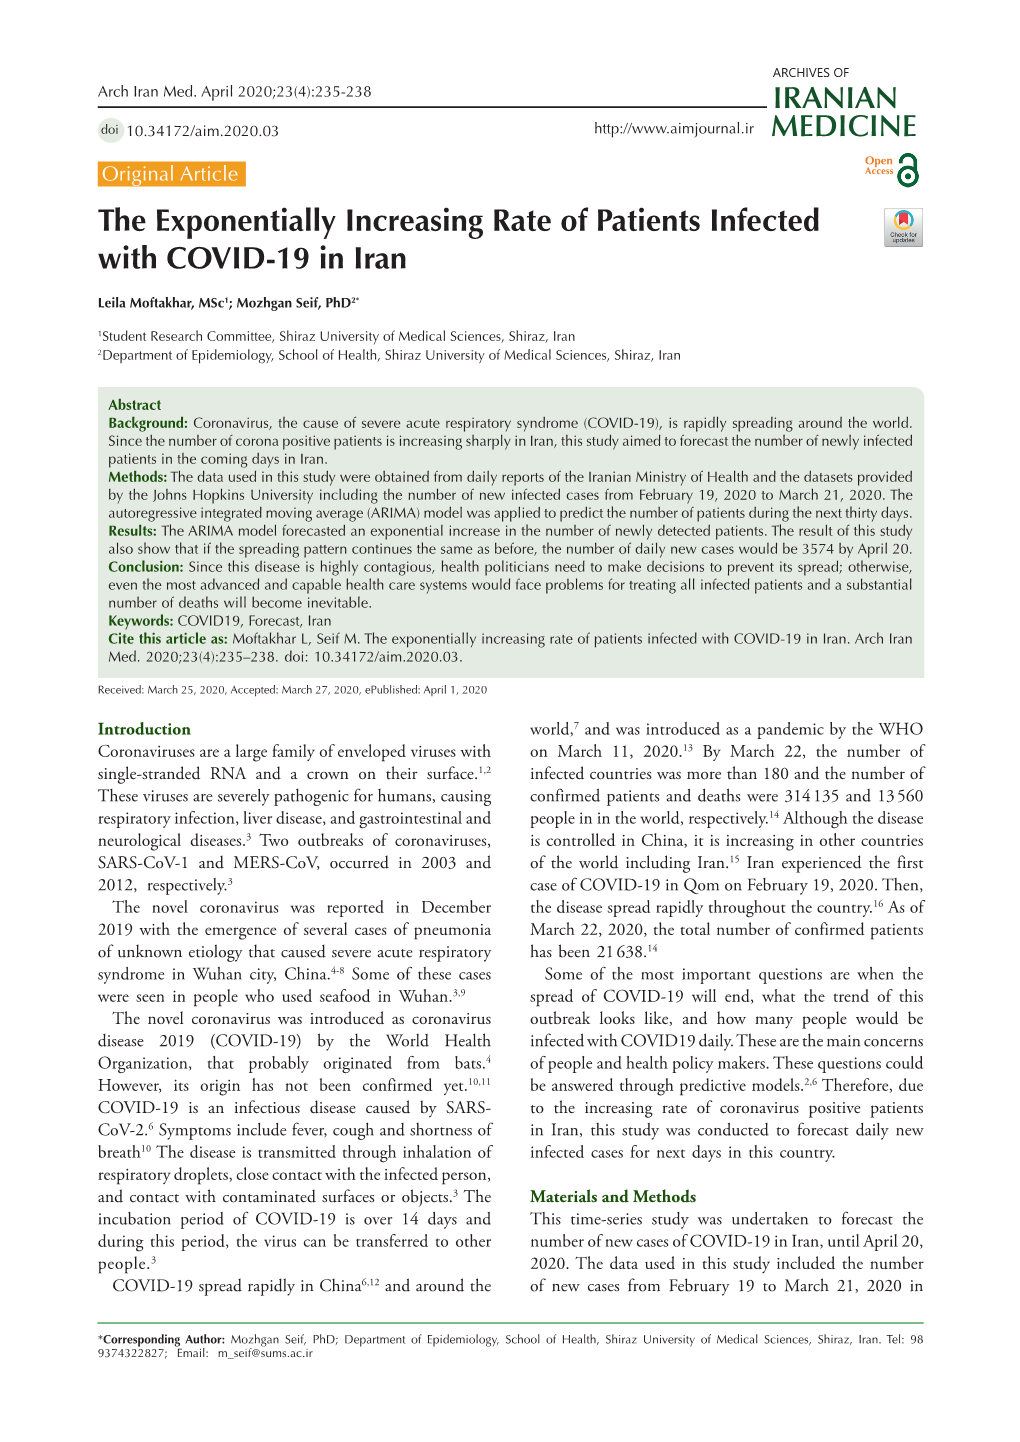 The Exponentially Increasing Rate of Patients Infected with COVID-19 in Iran